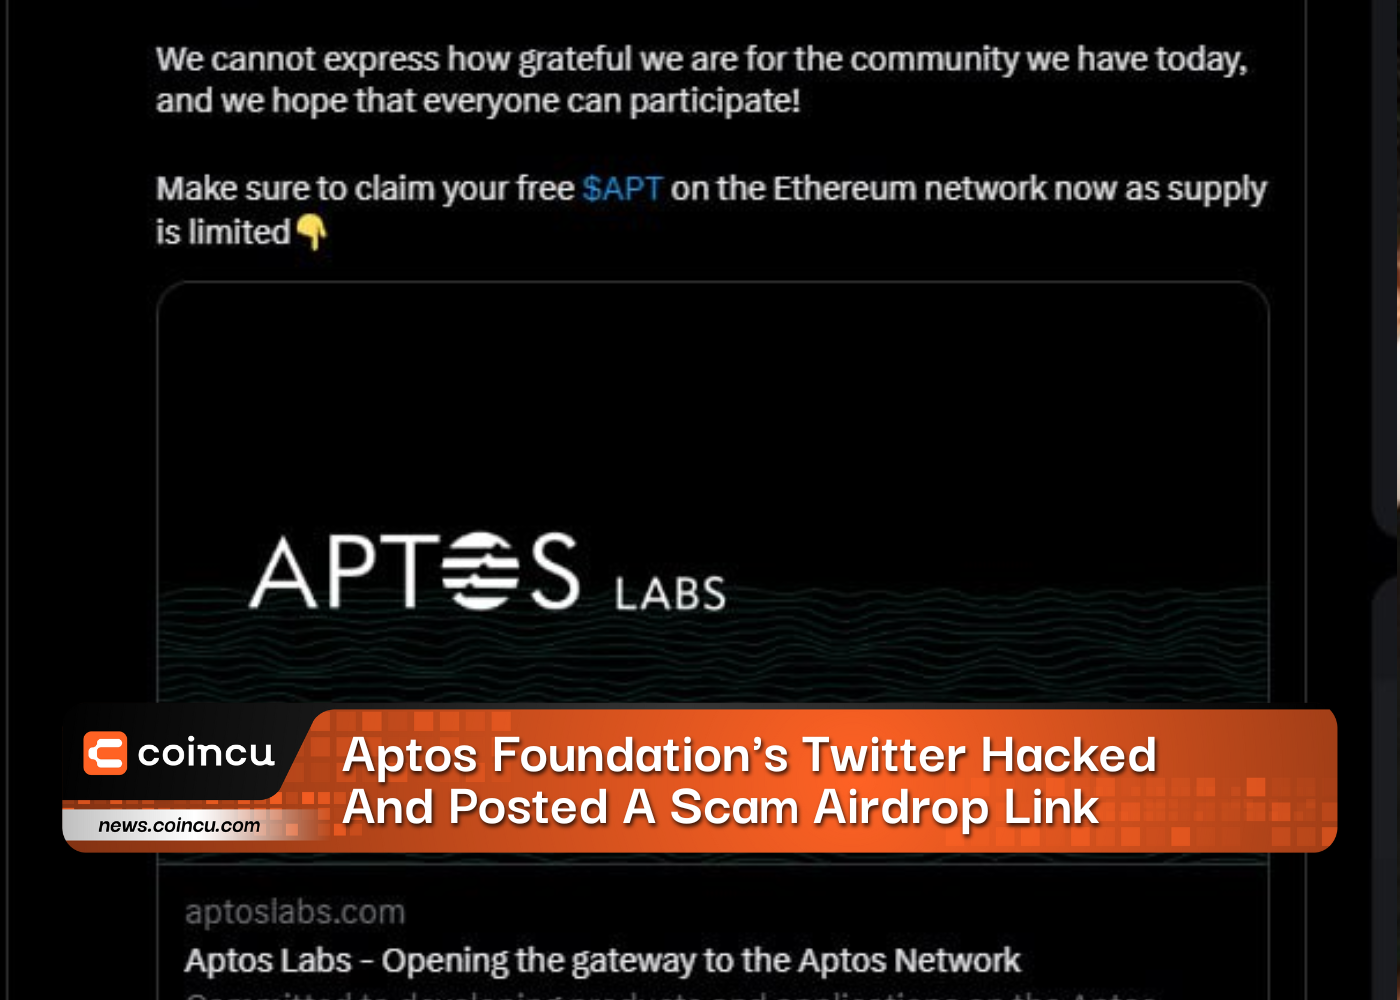 Aptos Foundation's Twitter Hacked And Posted A Scam Airdrop Link